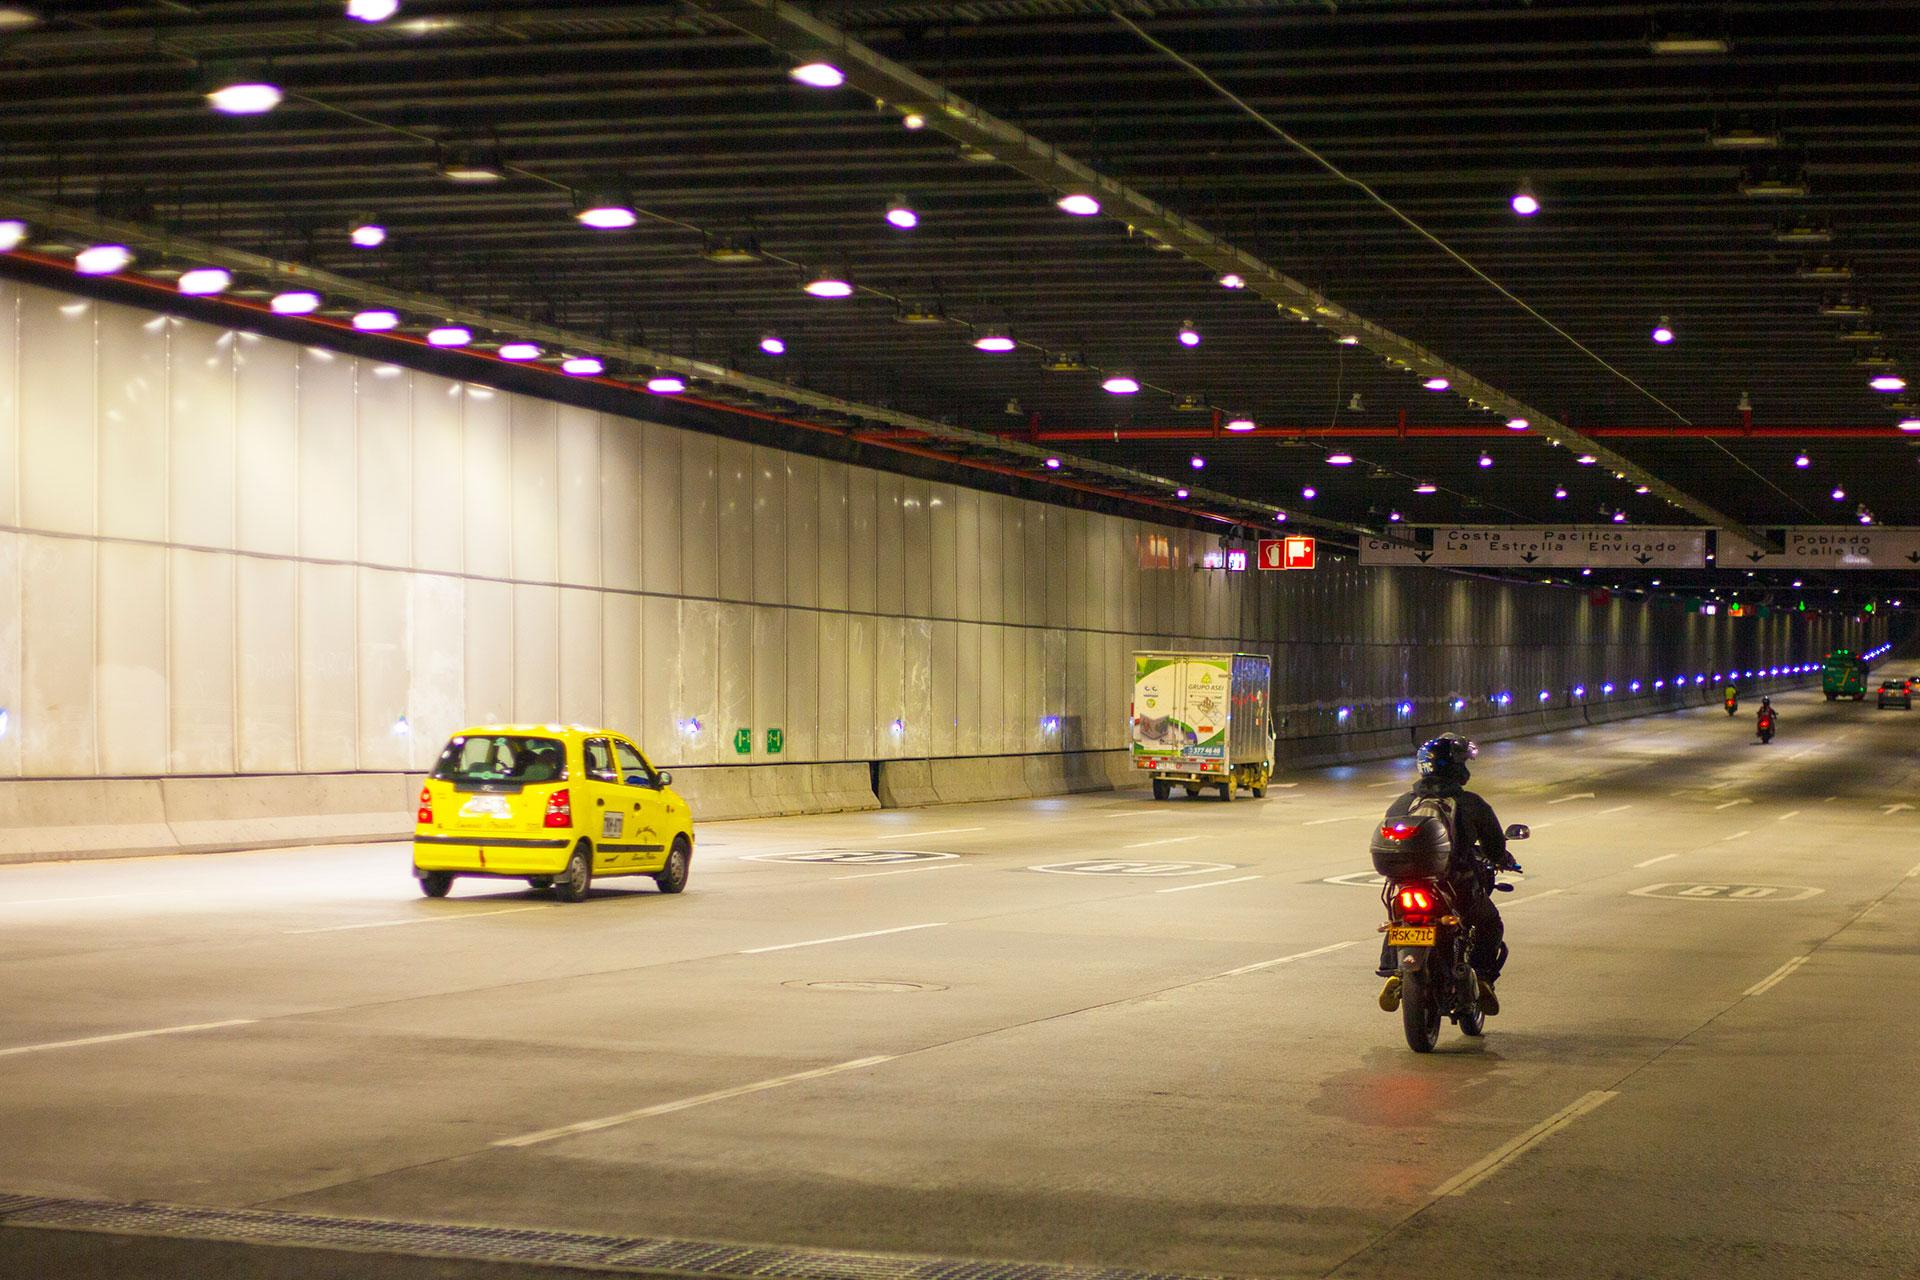 GL2 Compact ensures excellent visibility and visual comfort in this busy tunnel